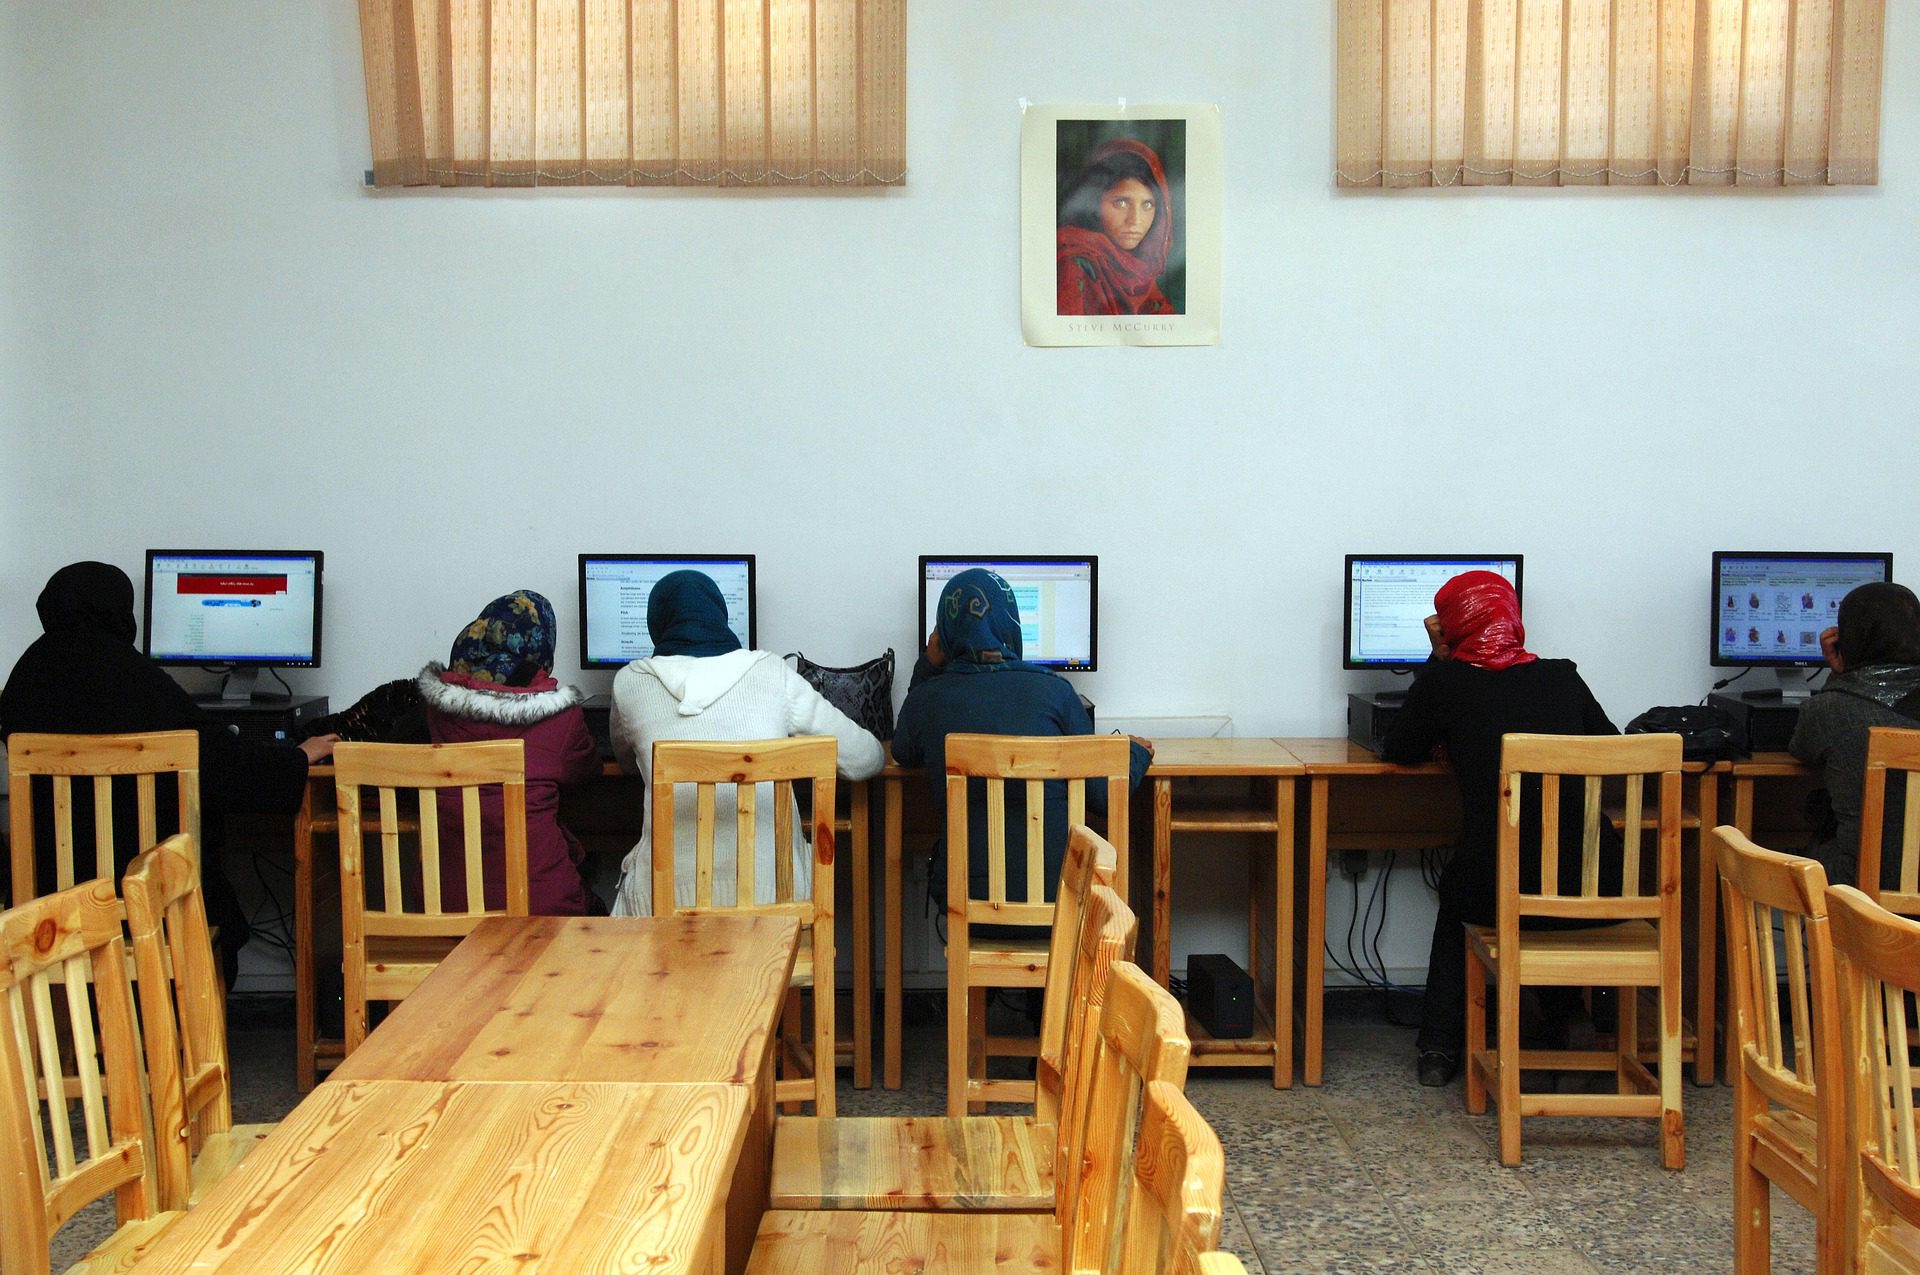 Afghanistan: Quality education must be equally accessible to all, UN experts say